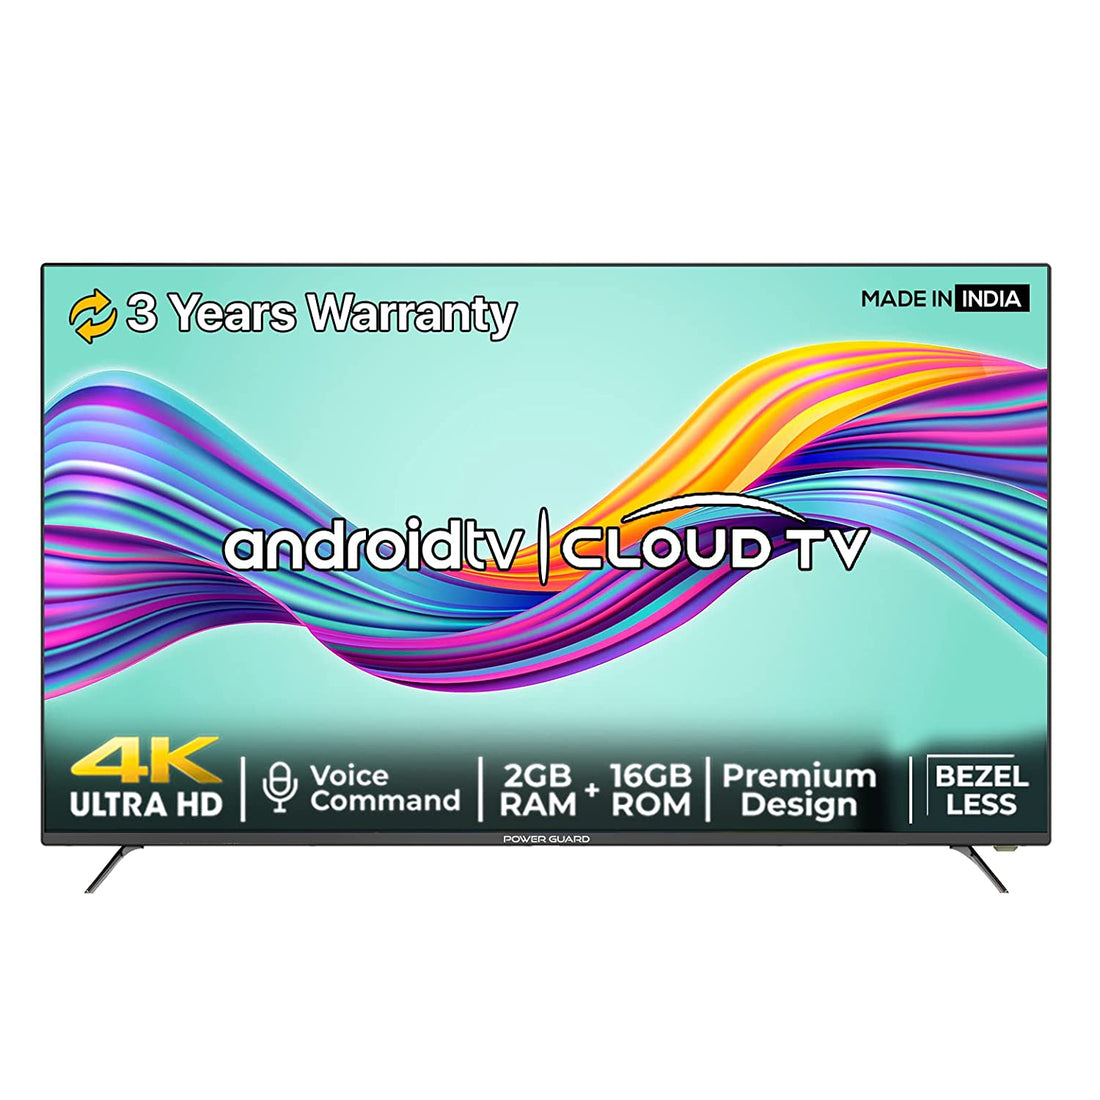 Buy 65 Inch Android TV in India | Latest Models & Best Prices